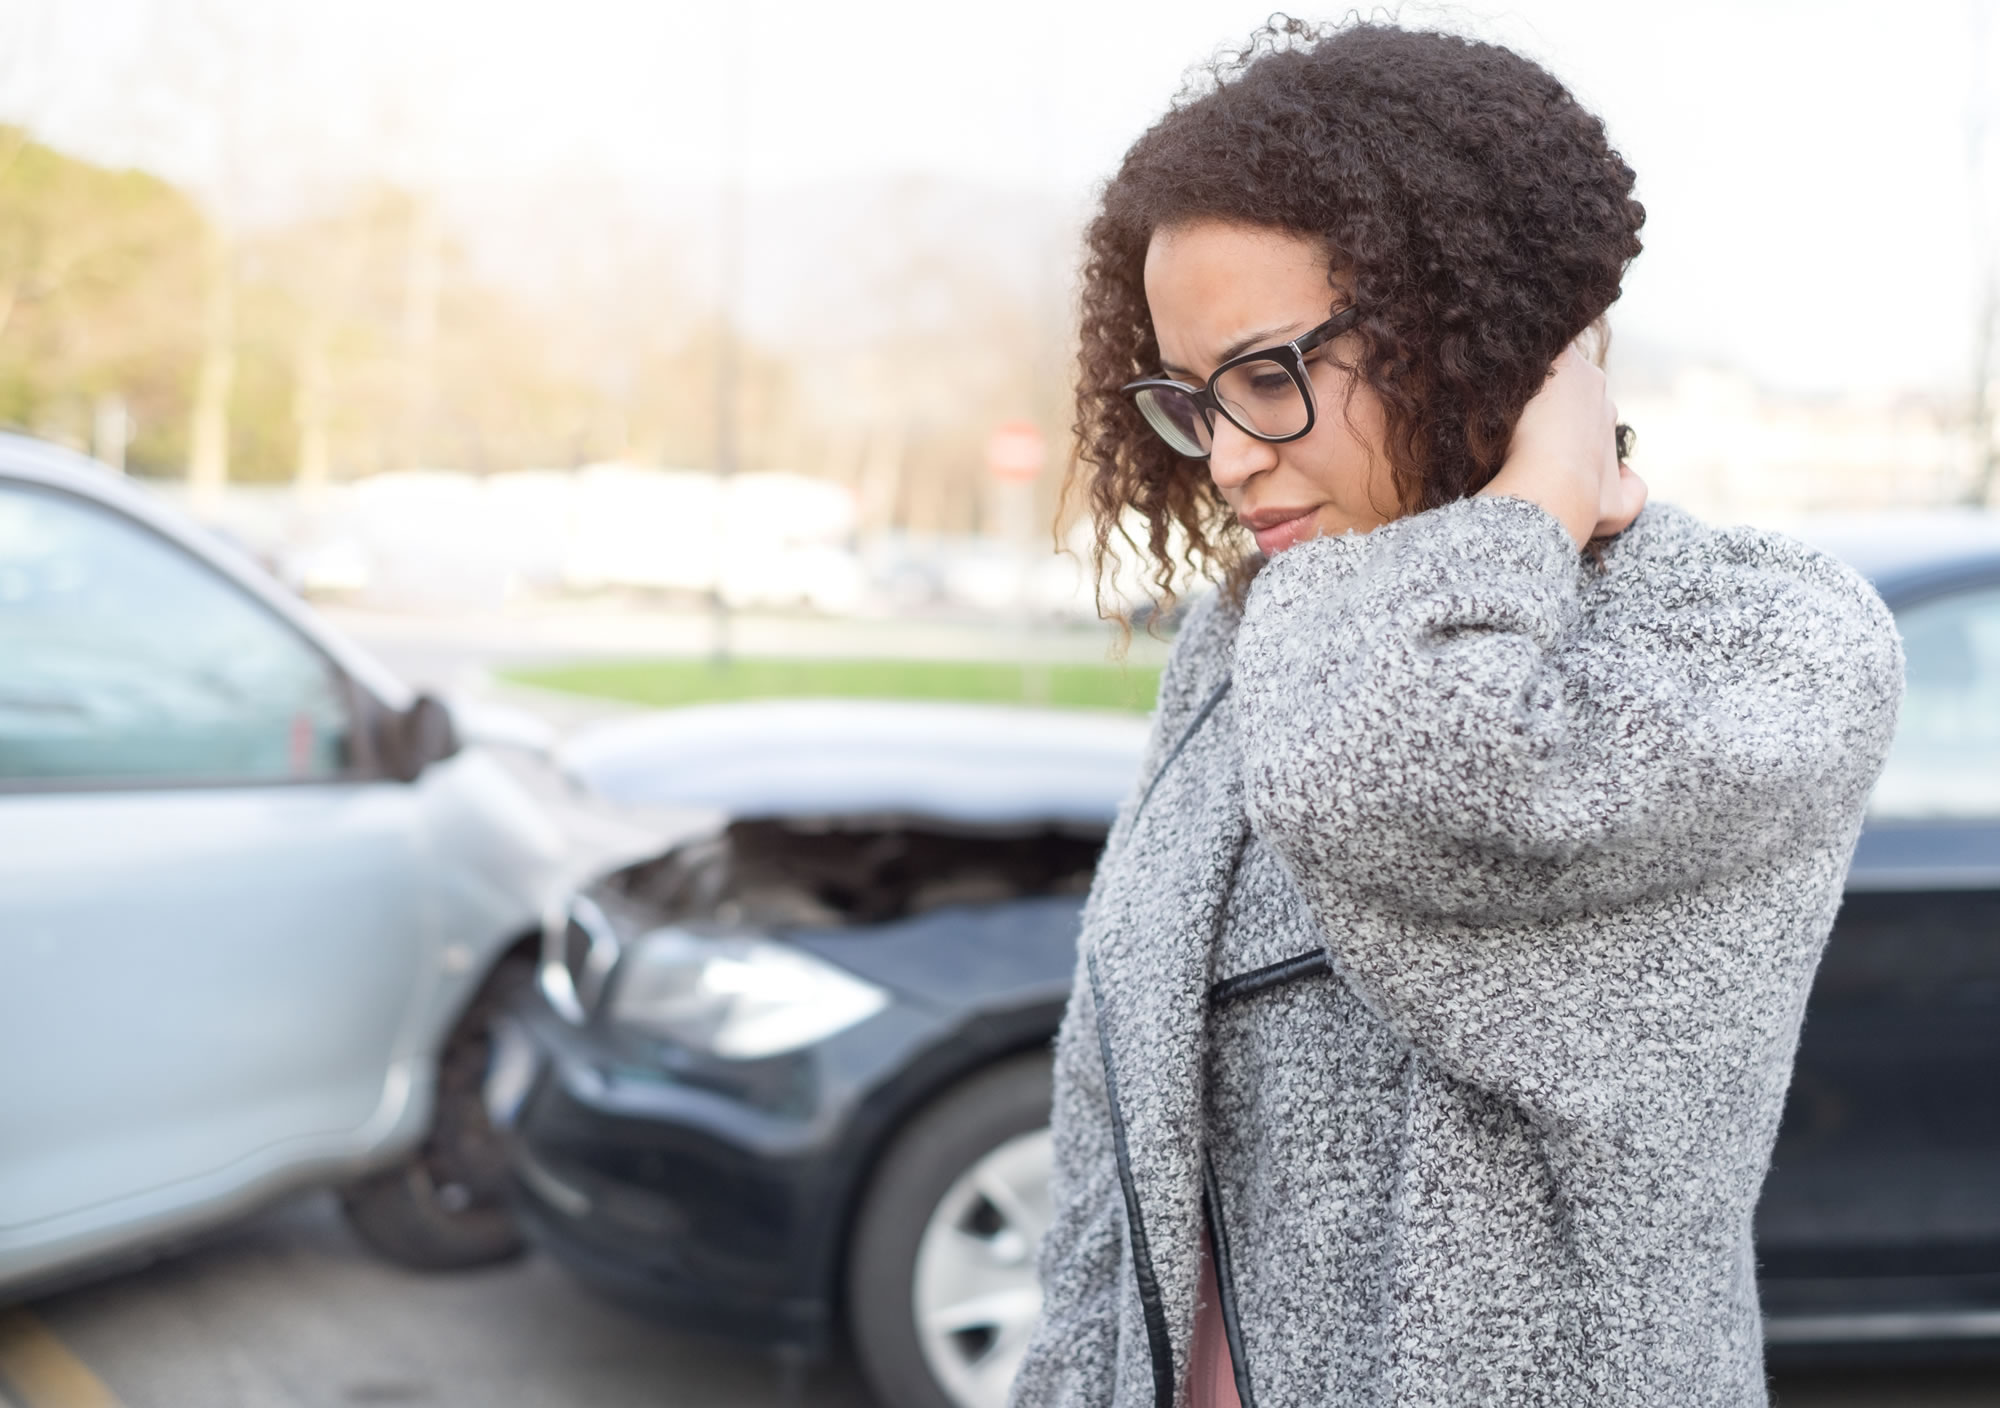 Car Accident Injury Compensation Claims Sheffield. Free, Personal Injury Claim Assessments. Road Traffic Accident